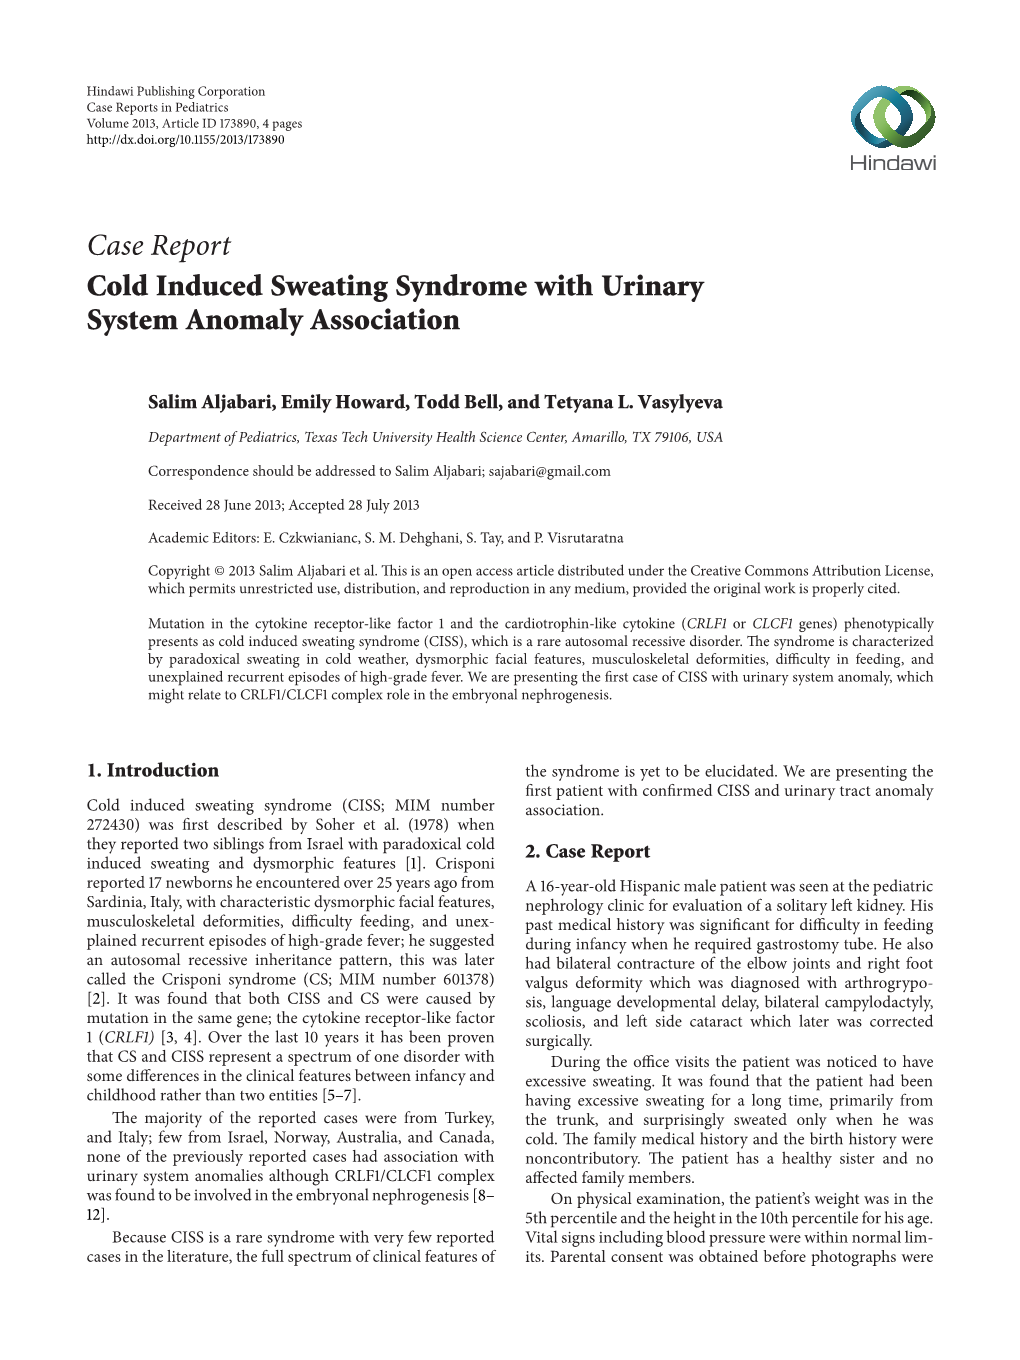 Cold Induced Sweating Syndrome with Urinary System Anomaly Association